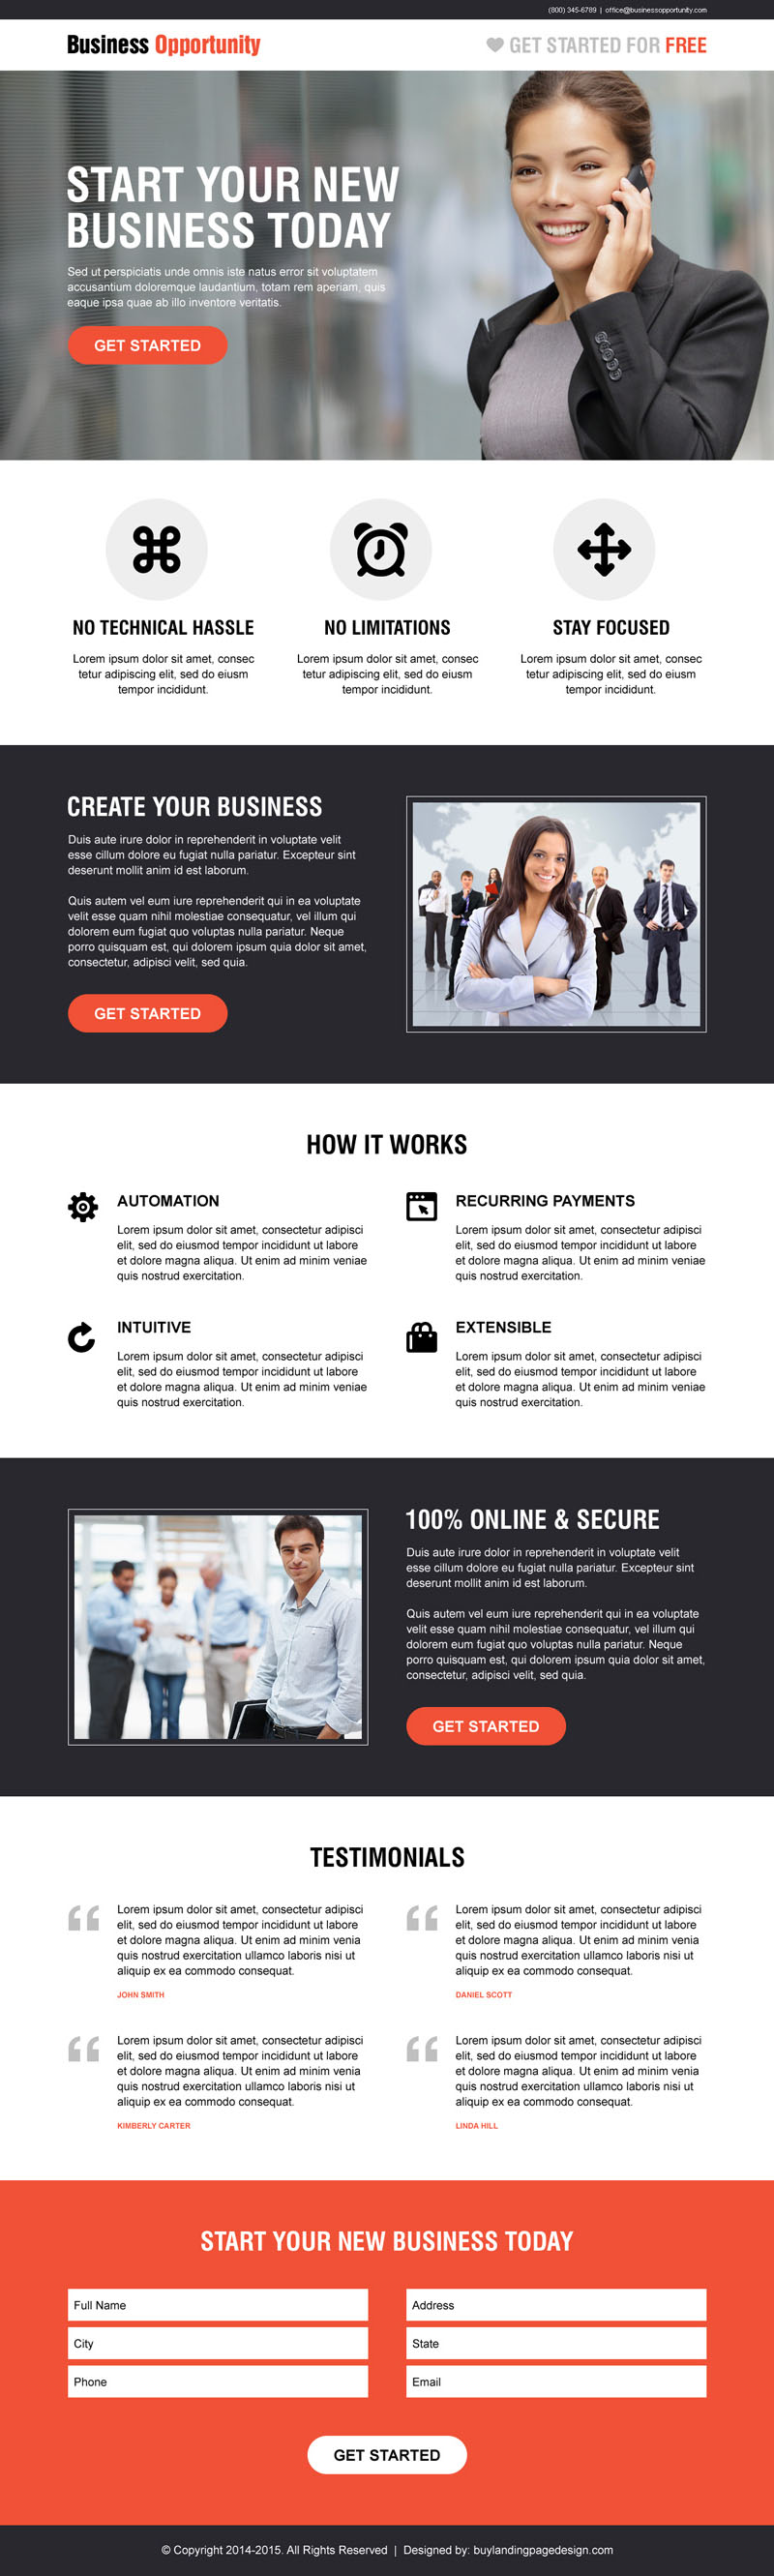 Purchase start your new business today call to action converting landing page design to convert your business into next label from https://www.buylandingpagedesign.com/buy/start-your-new-business-today-call-to-action-converting-landing-page-design/1399